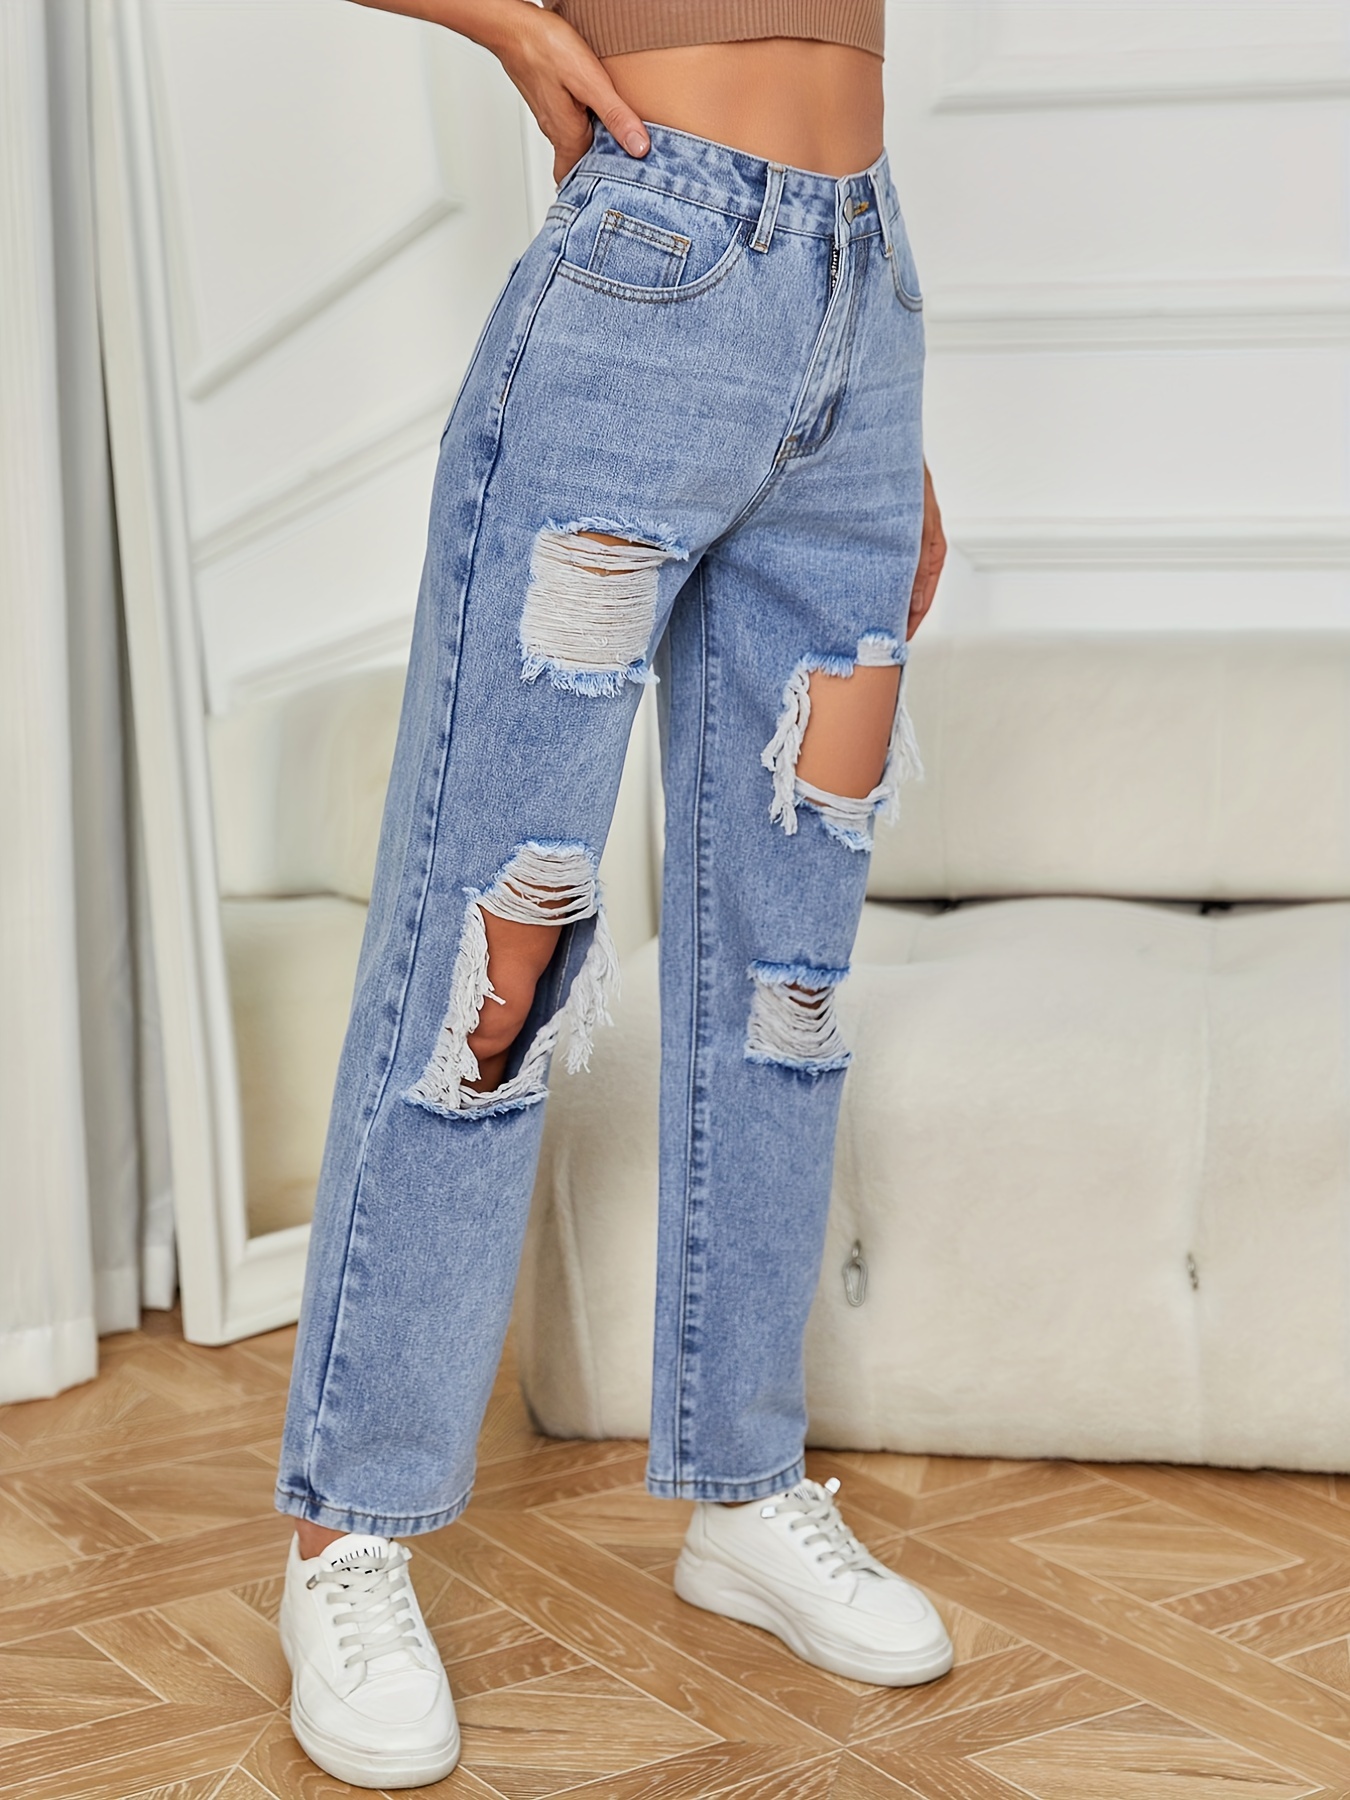 Ripped Knee Cut Distressed Jeans, Light Wash Slash Pocket Button Tousers,  Casual & Trendy Pants For Every Day, Women's Denim Jeans & Clothing